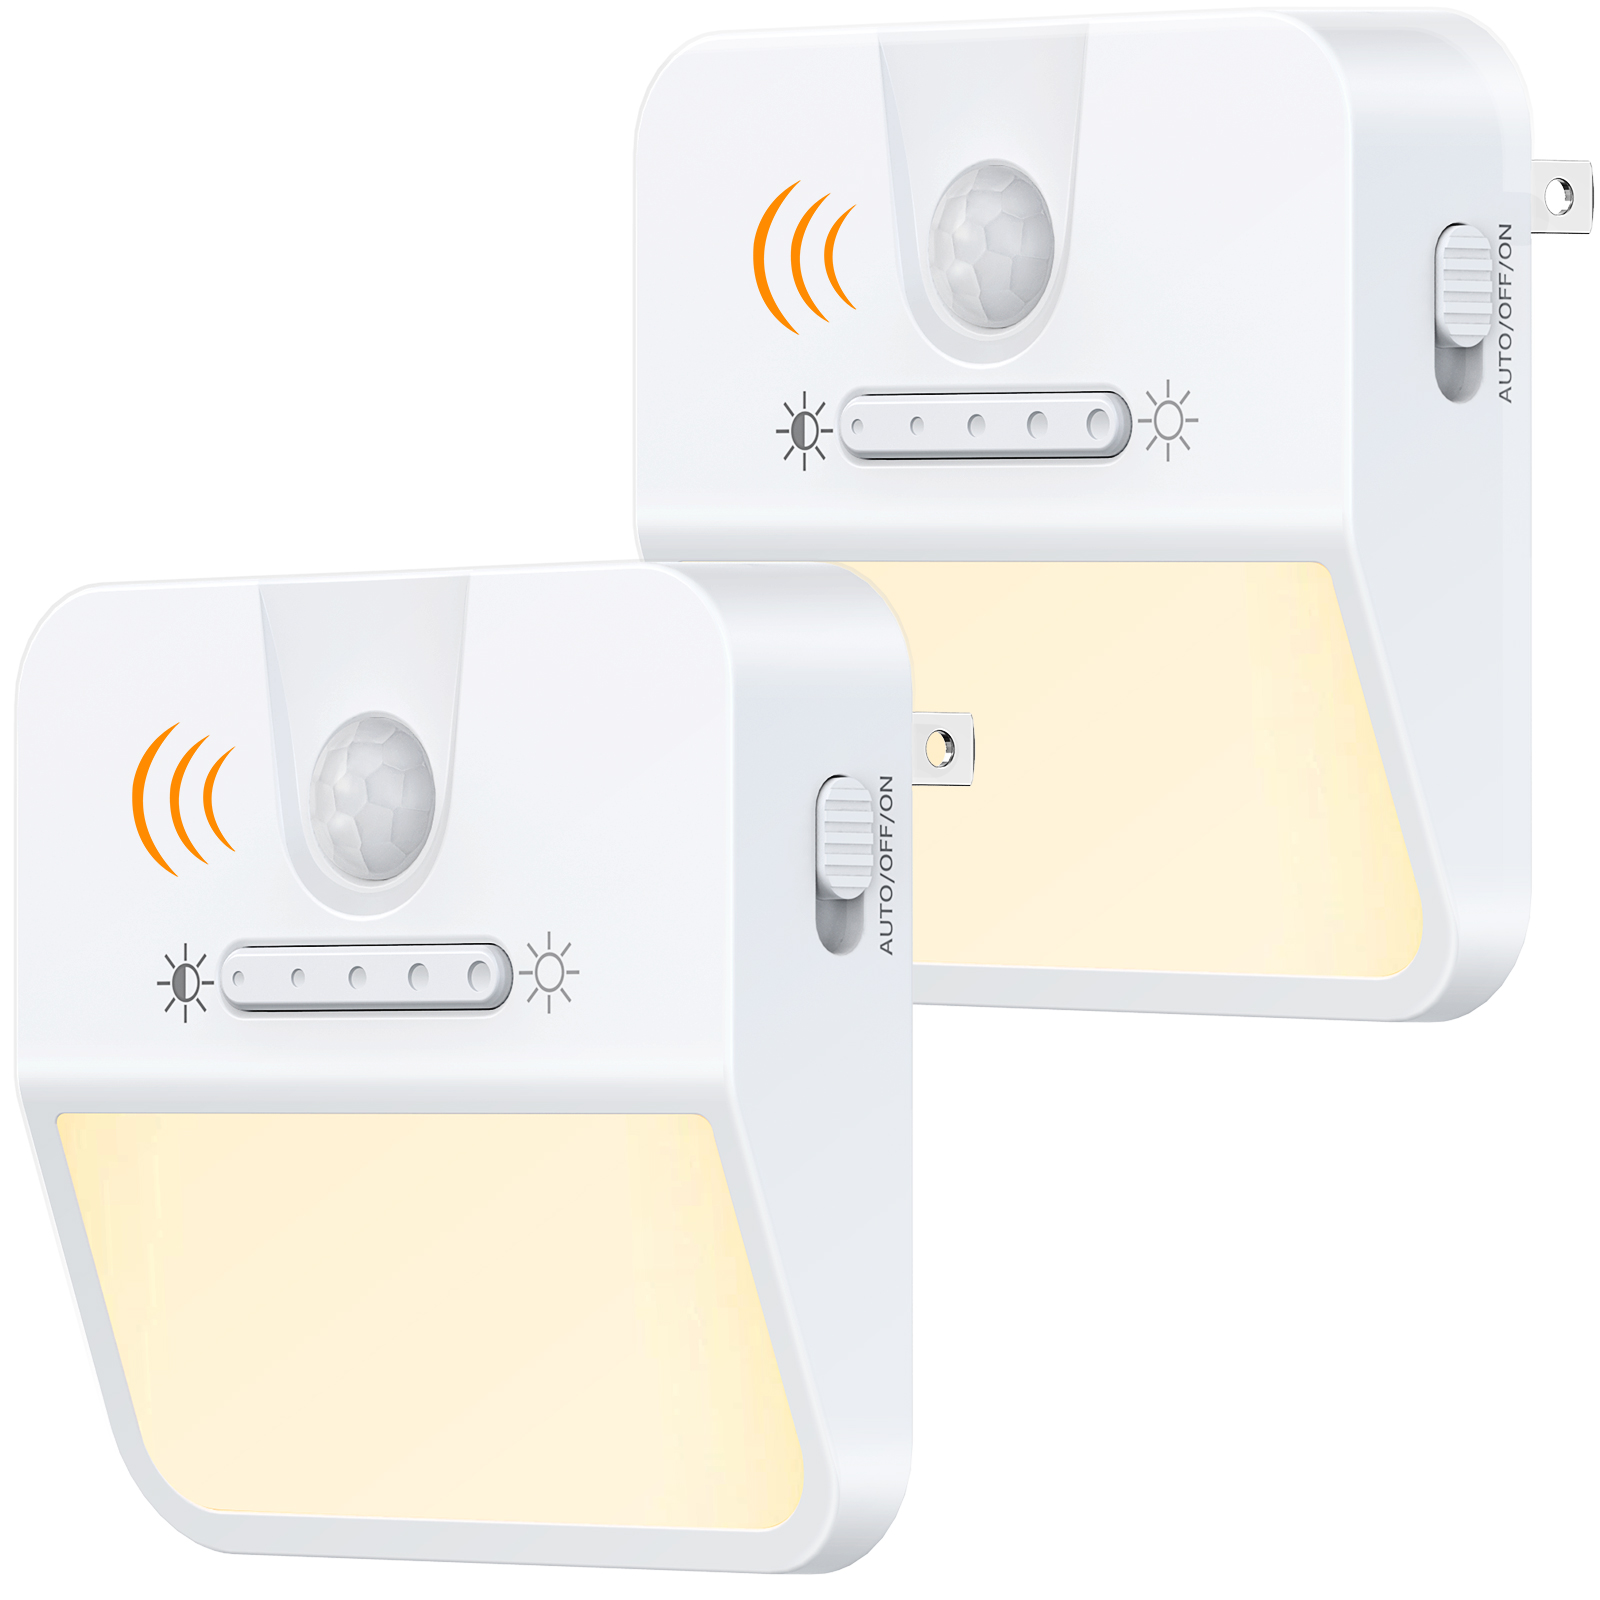 Night Light Plug in Wall, TEUMI Motion Sensor Light Indoor with Auto/On/Off, 5-Level Dimmable LED Night Light for Kids, Warm Yellow Night Lamp for Bedroom, Bathroom, Kitchen, Hallway, Stairway, 2 Pack